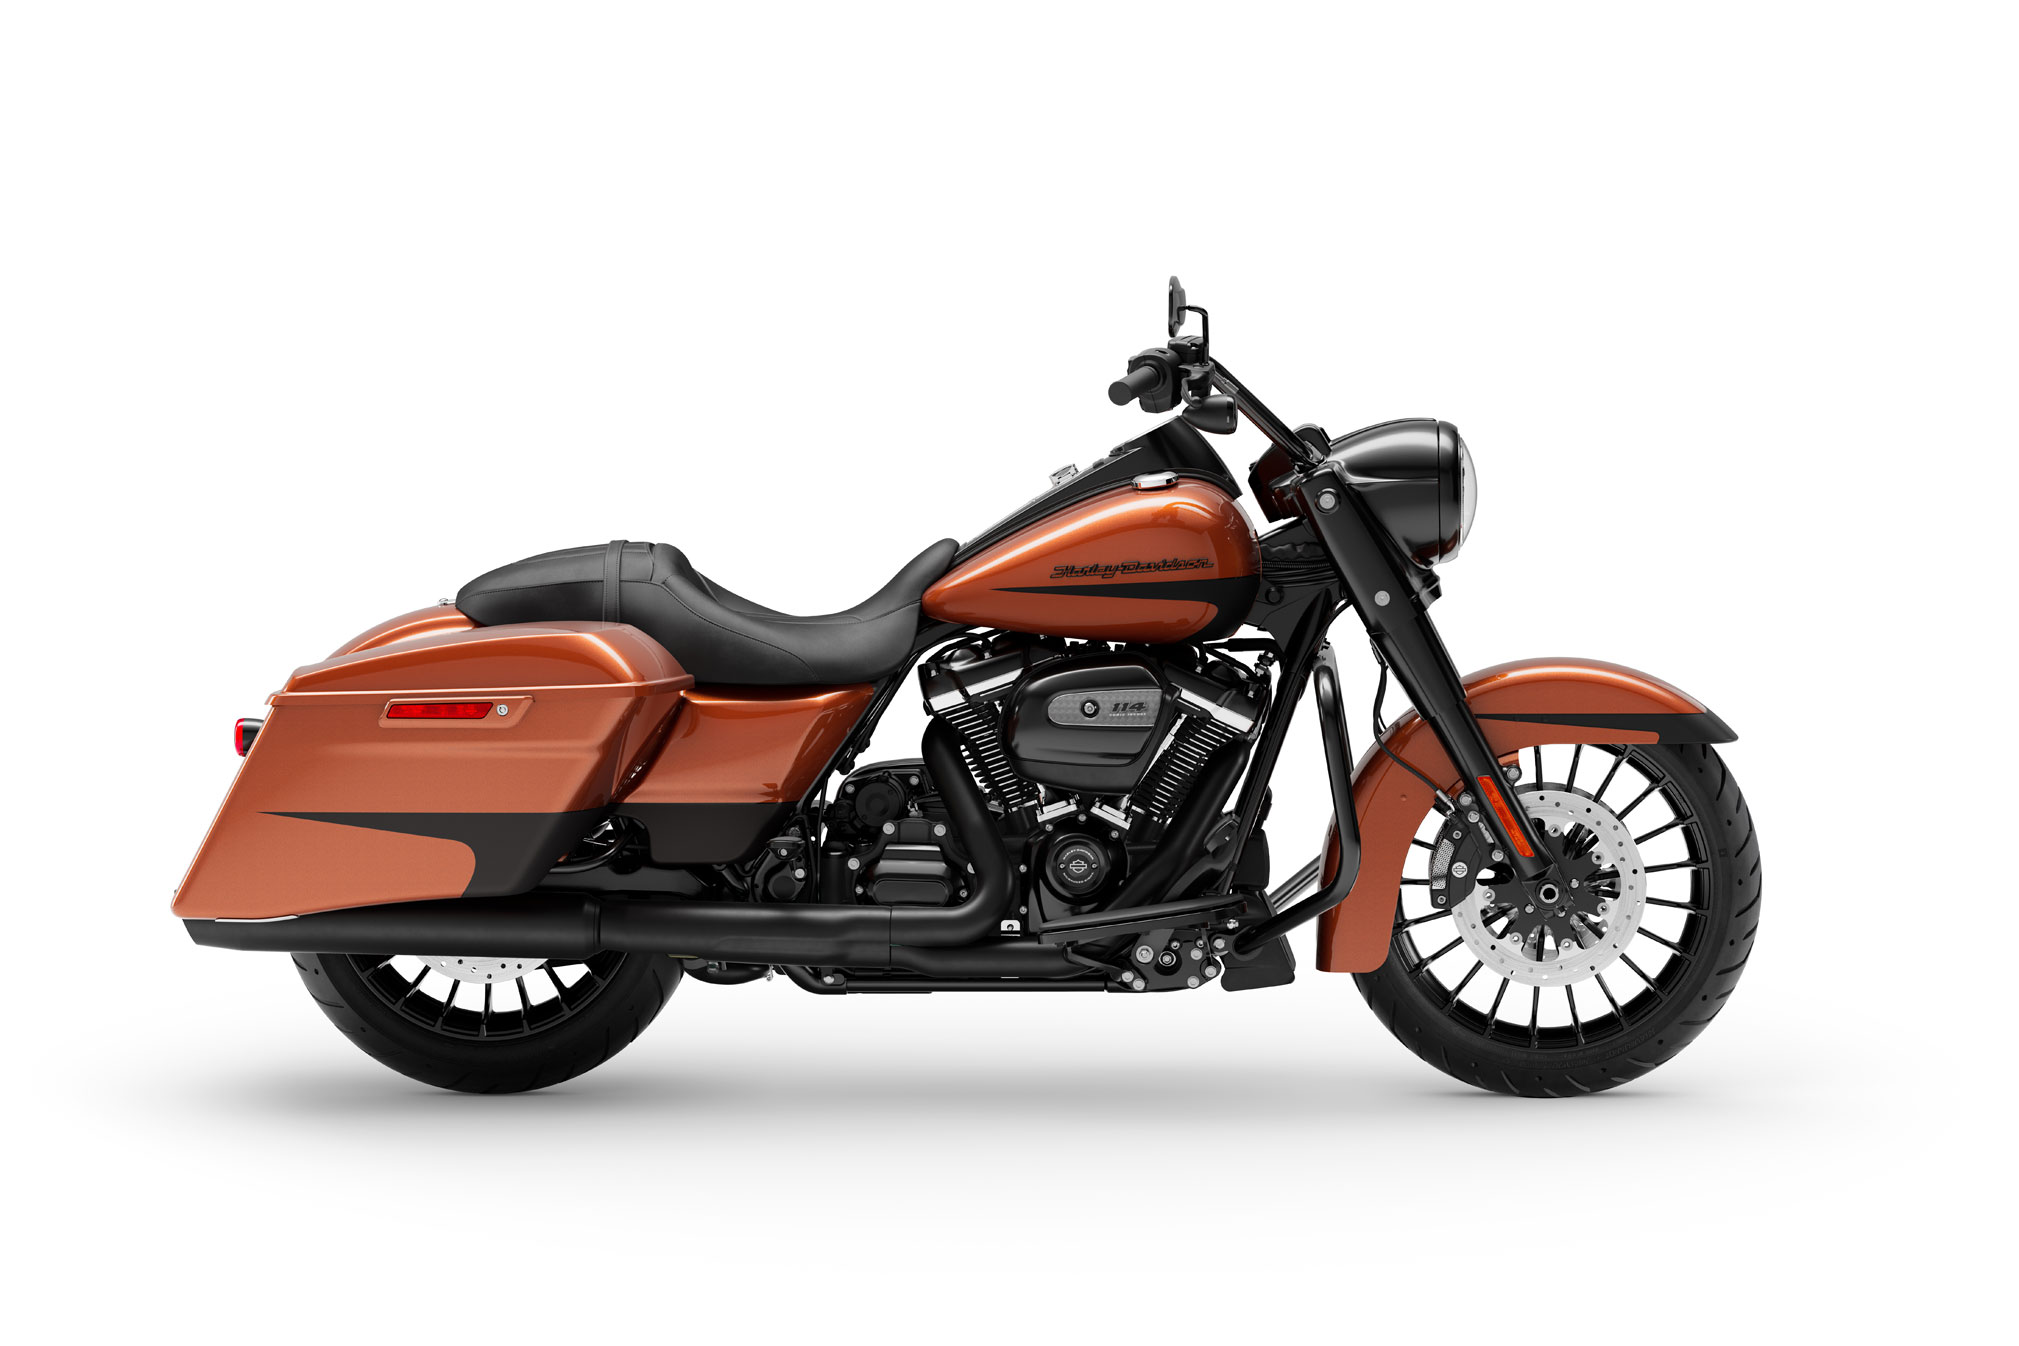 2019 Harley Davidson Road King Special Guide Total Motorcycle